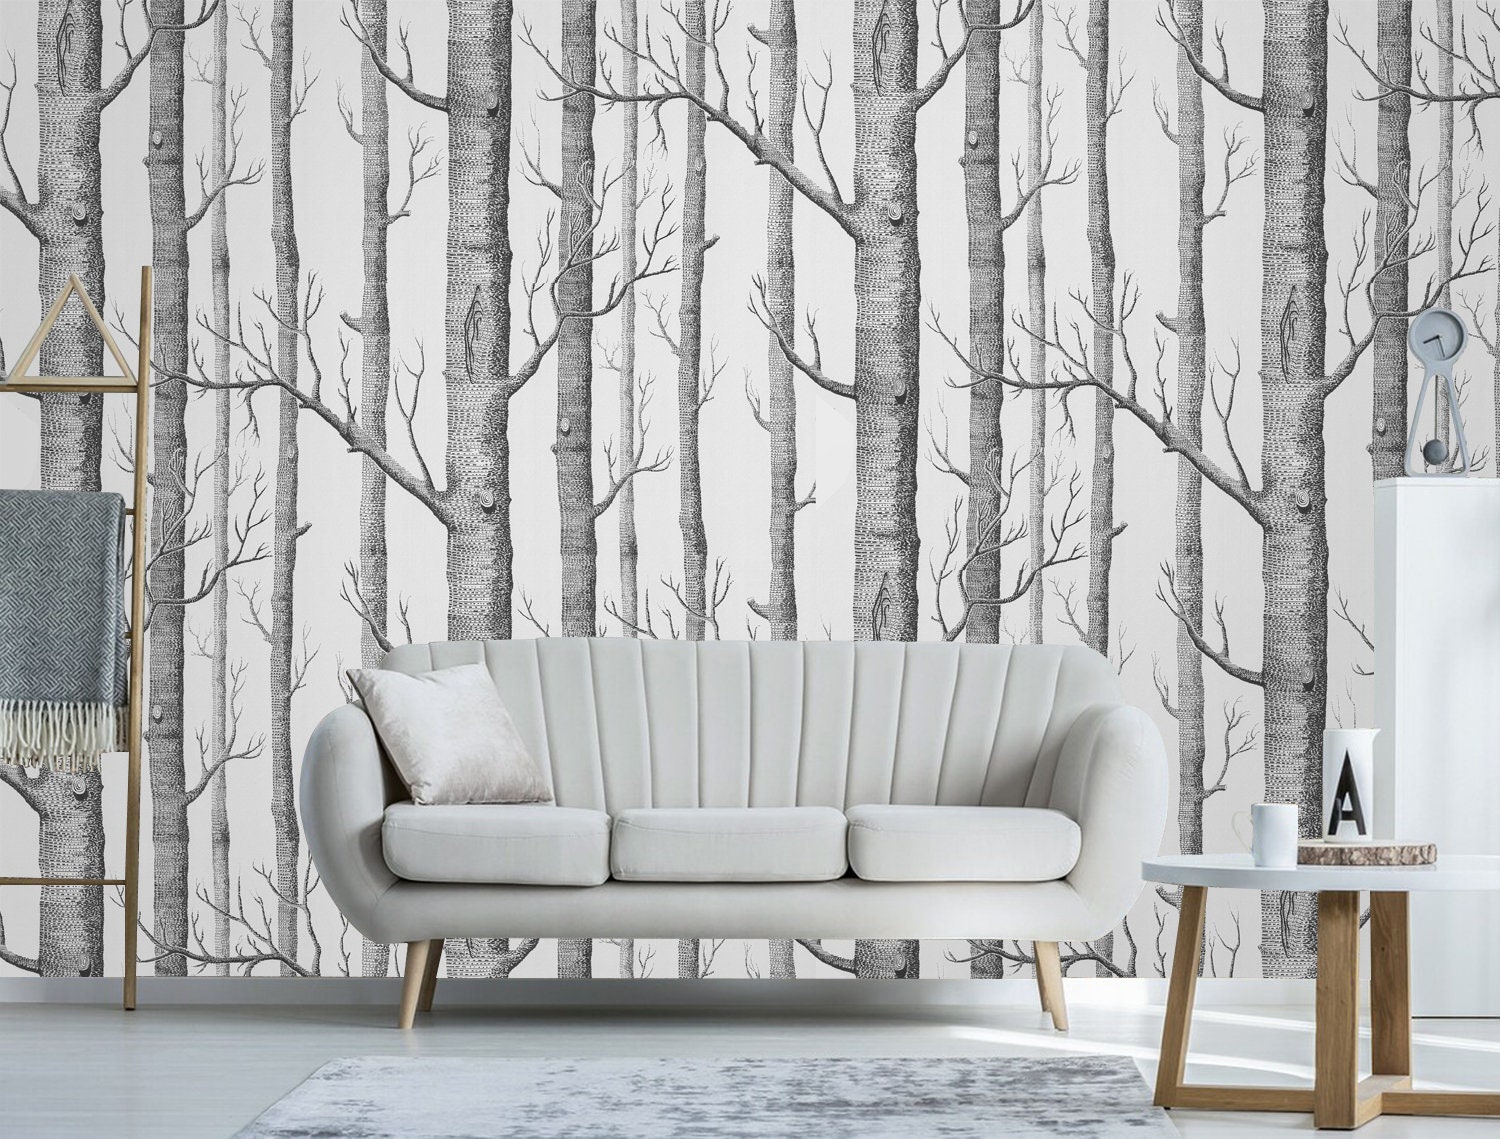 10 Excellent Sources for Buying Birch Tree Wallpaper  Apartment Therapy